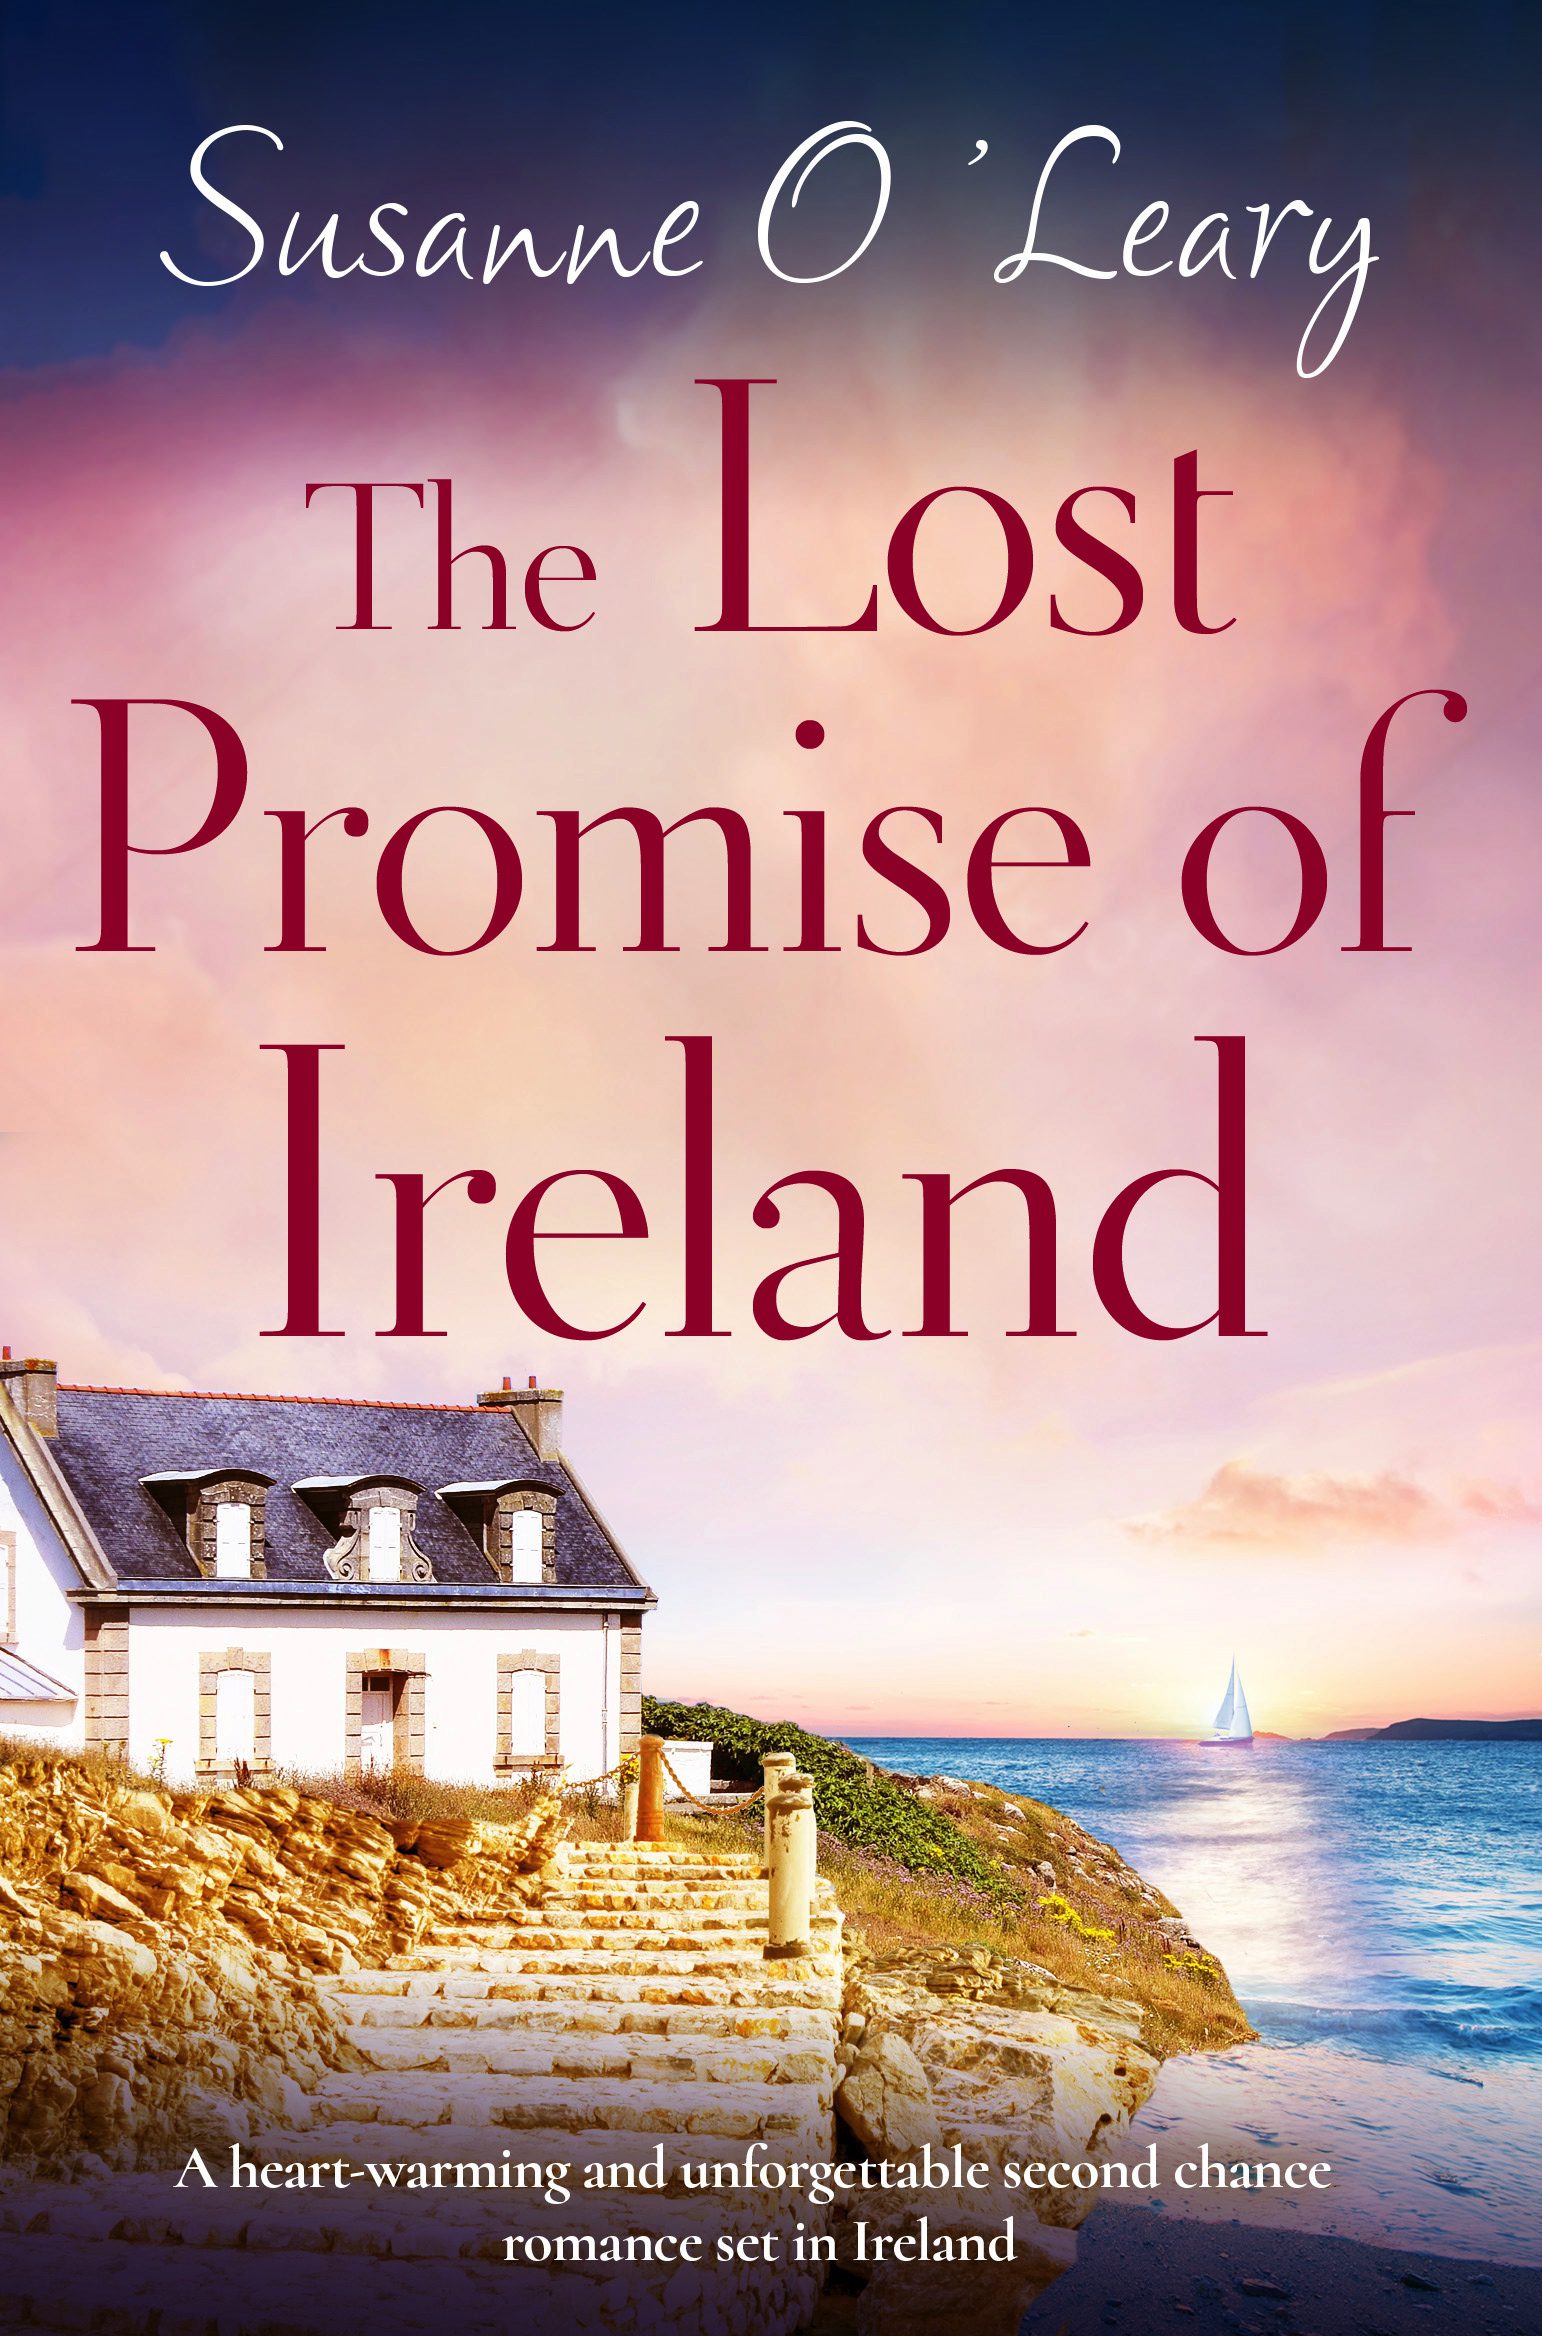 The Lost Promise of Ireland book cover